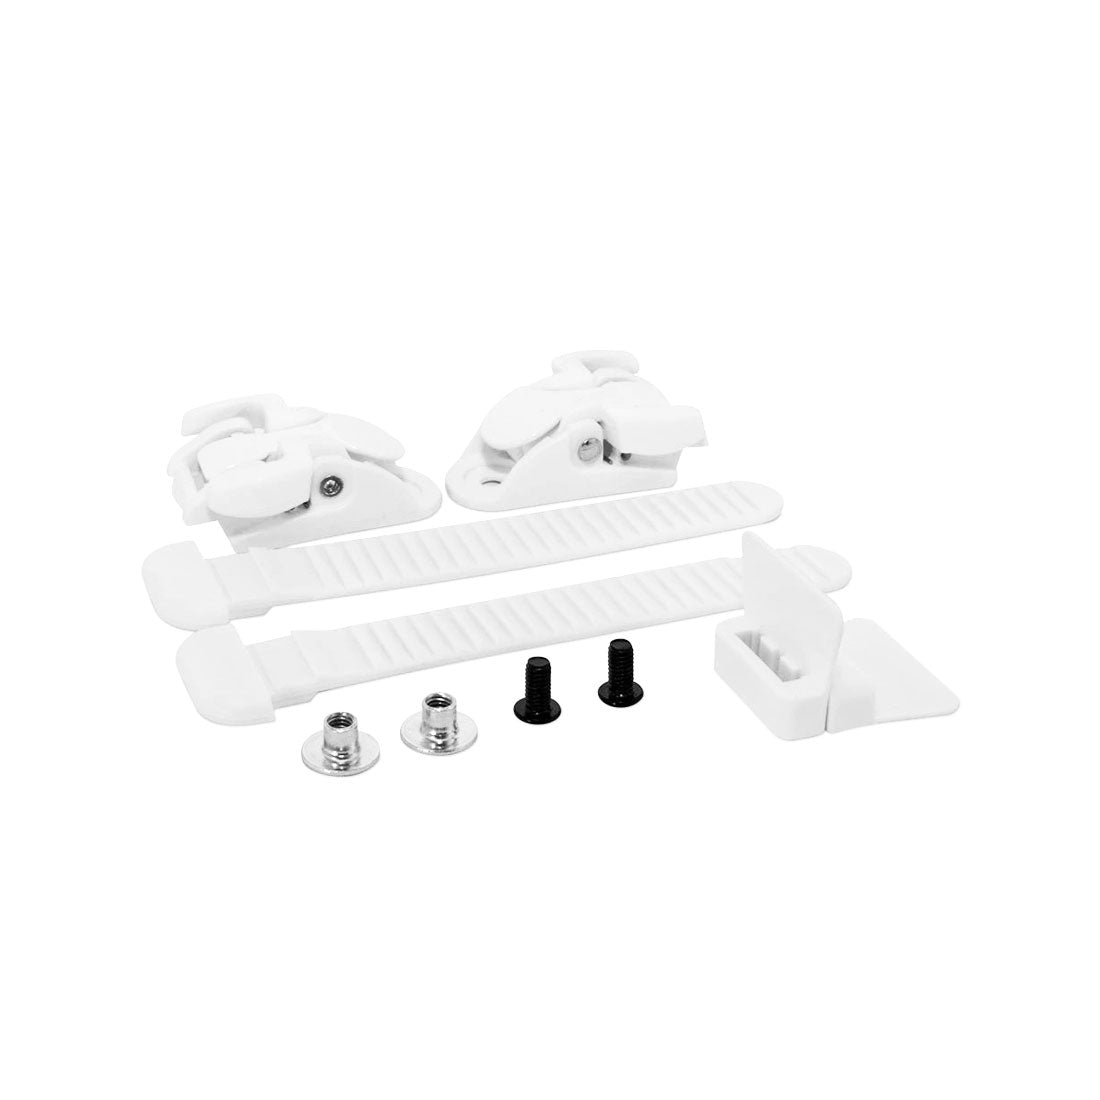 Bont Micro Buckle Kit - White Roller Skate Hardware and Parts